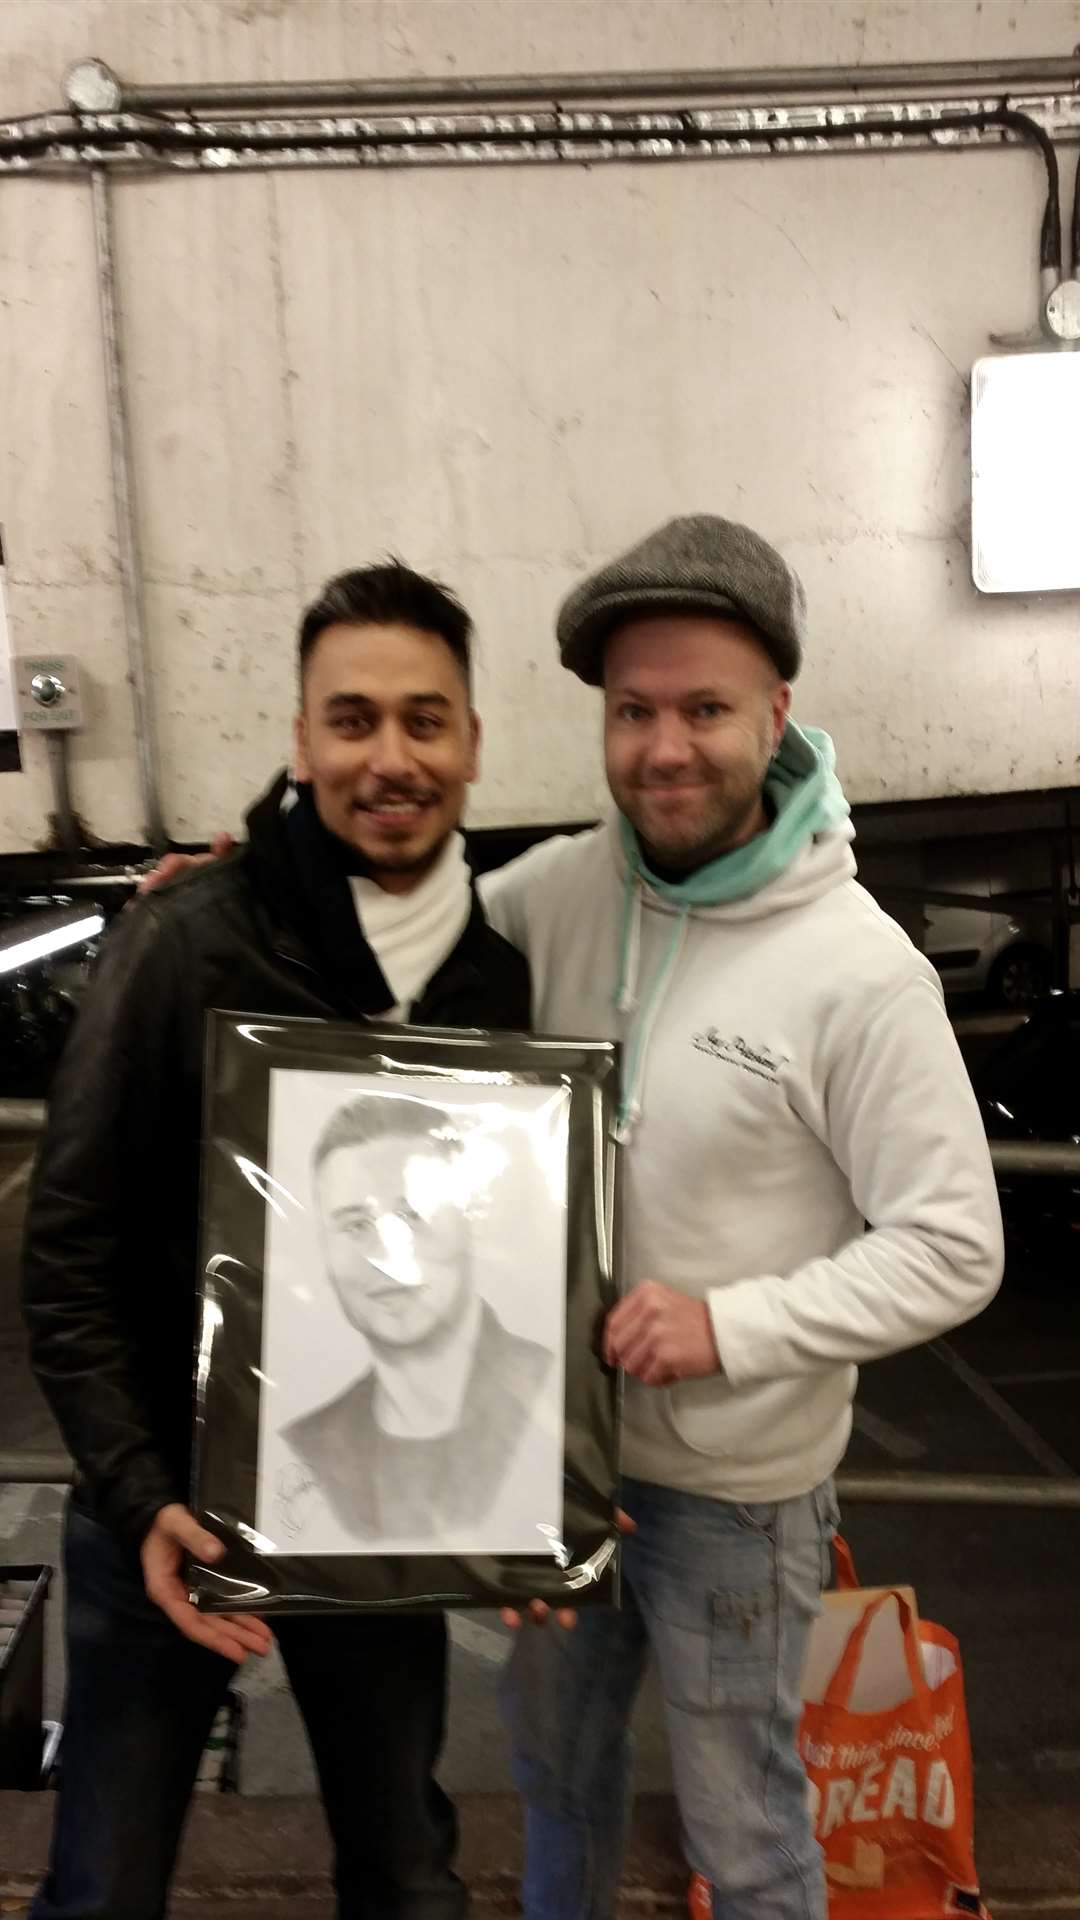 Sketch artist Jay Pritchard has drawn this year's Gravesend panto star Ricky Norwood